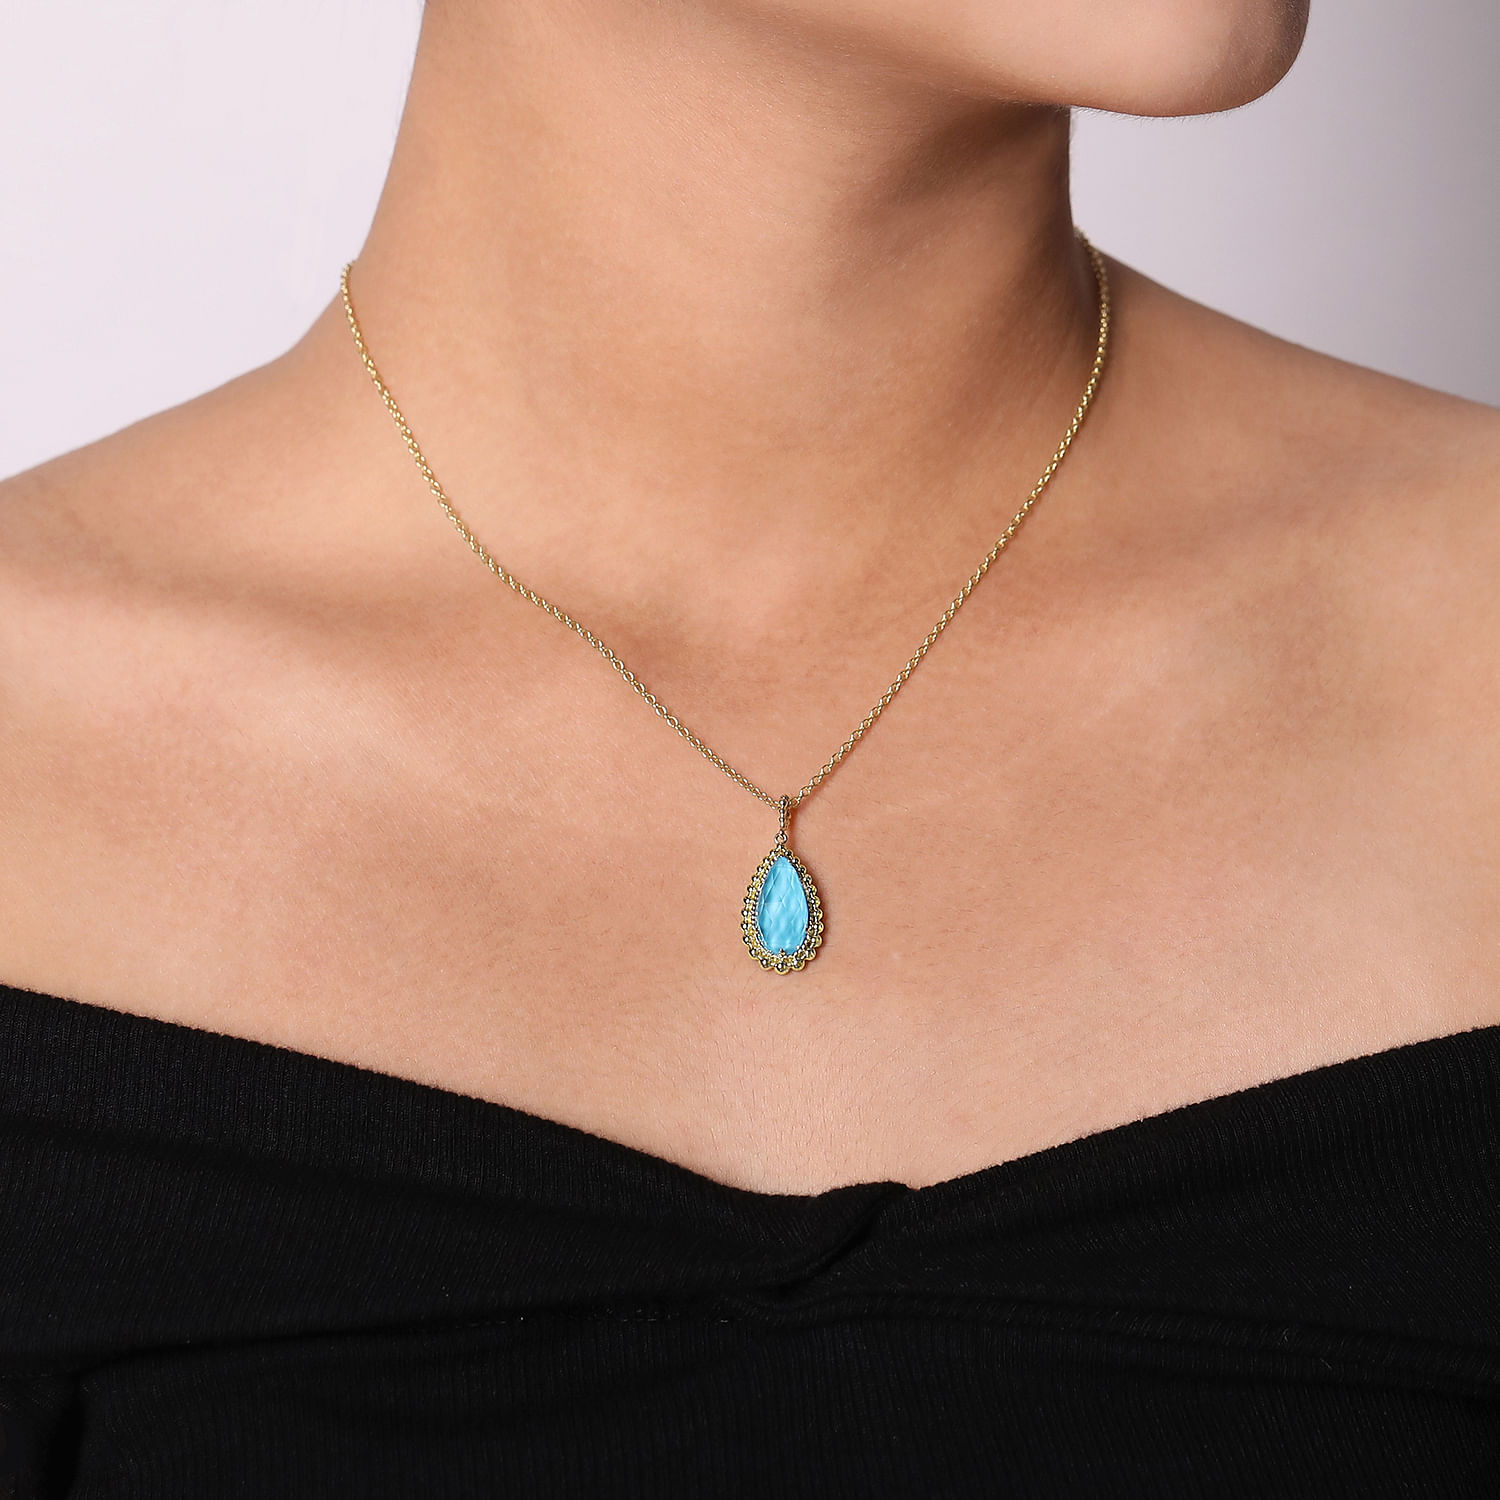 14K Yellow Gold Rock Crystal/Turquoise Pendant Necklace with Bujukan Beads